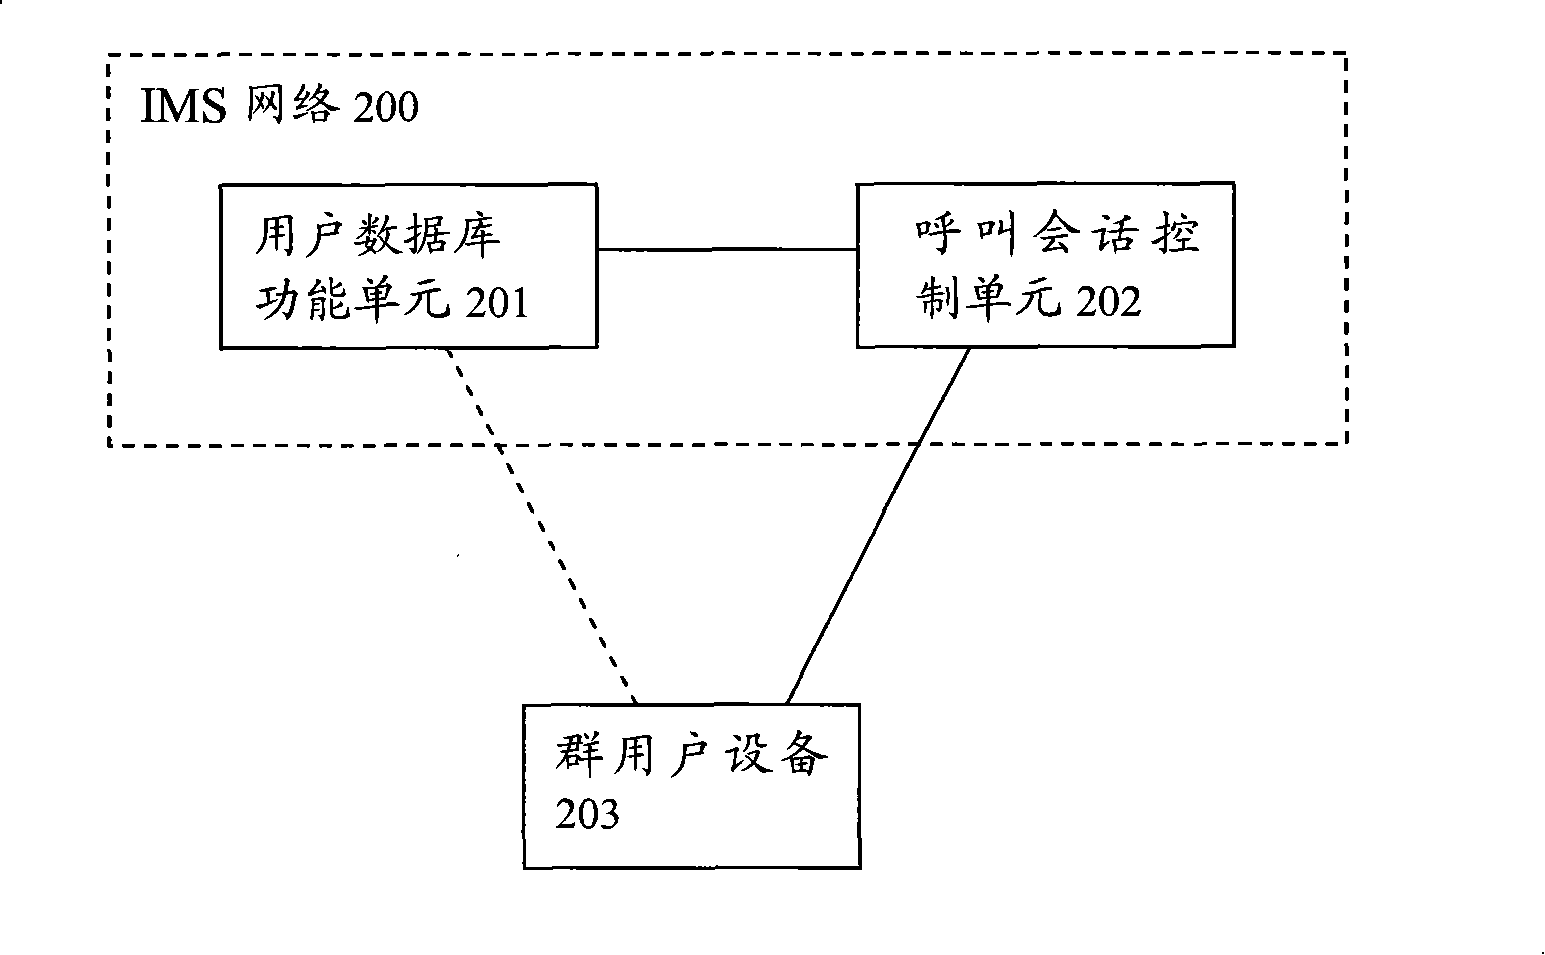 Method and system for providing service to group users in IMS network